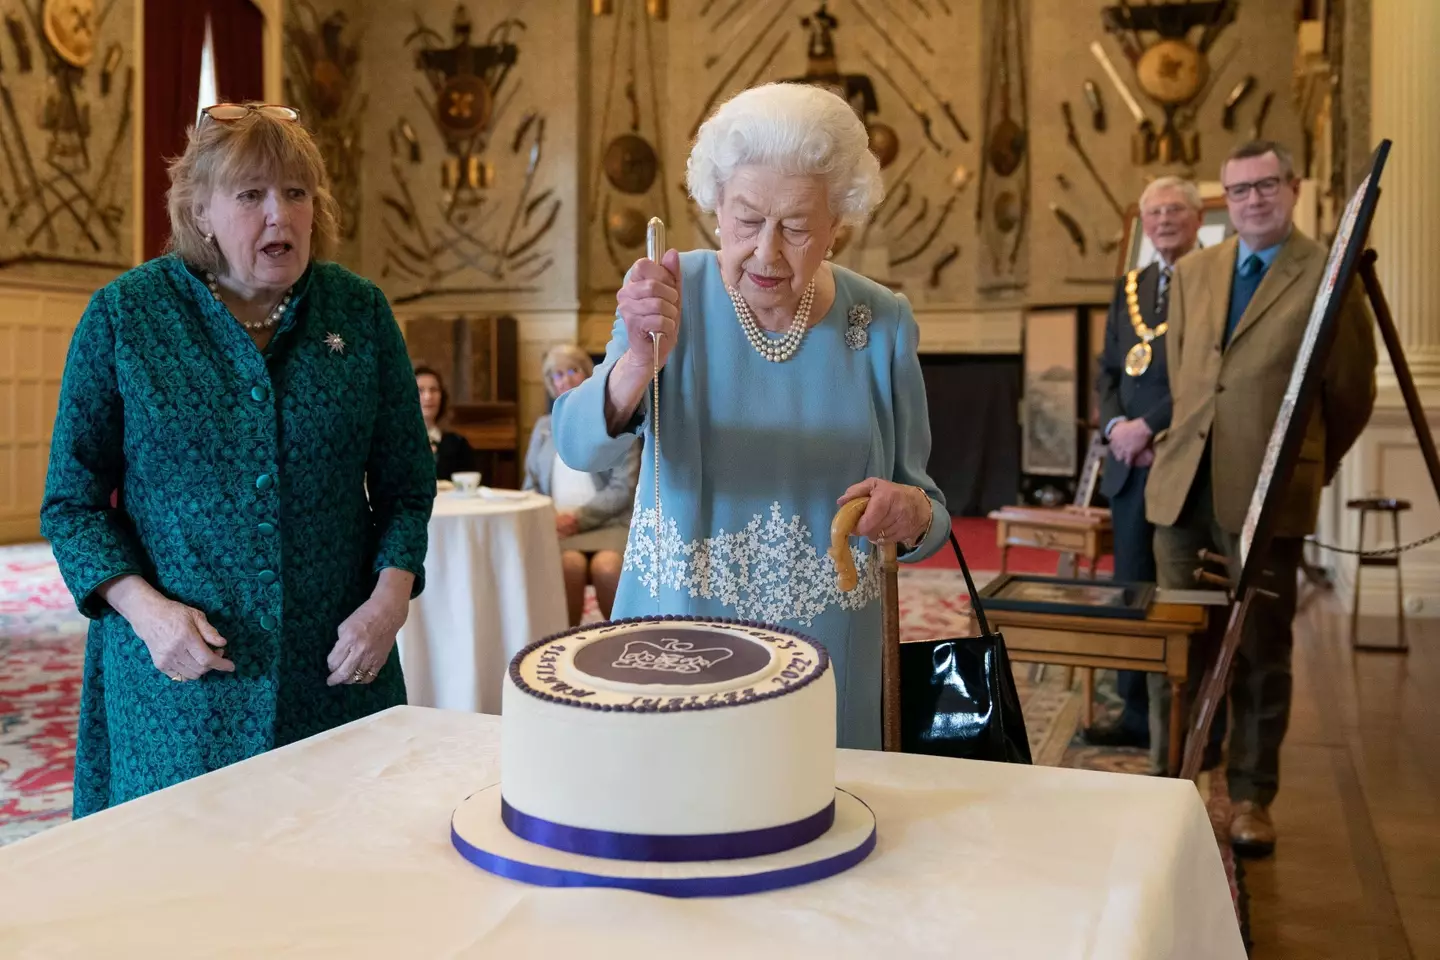 The Queen cut into the cake before declaring it could be finished by someone else (